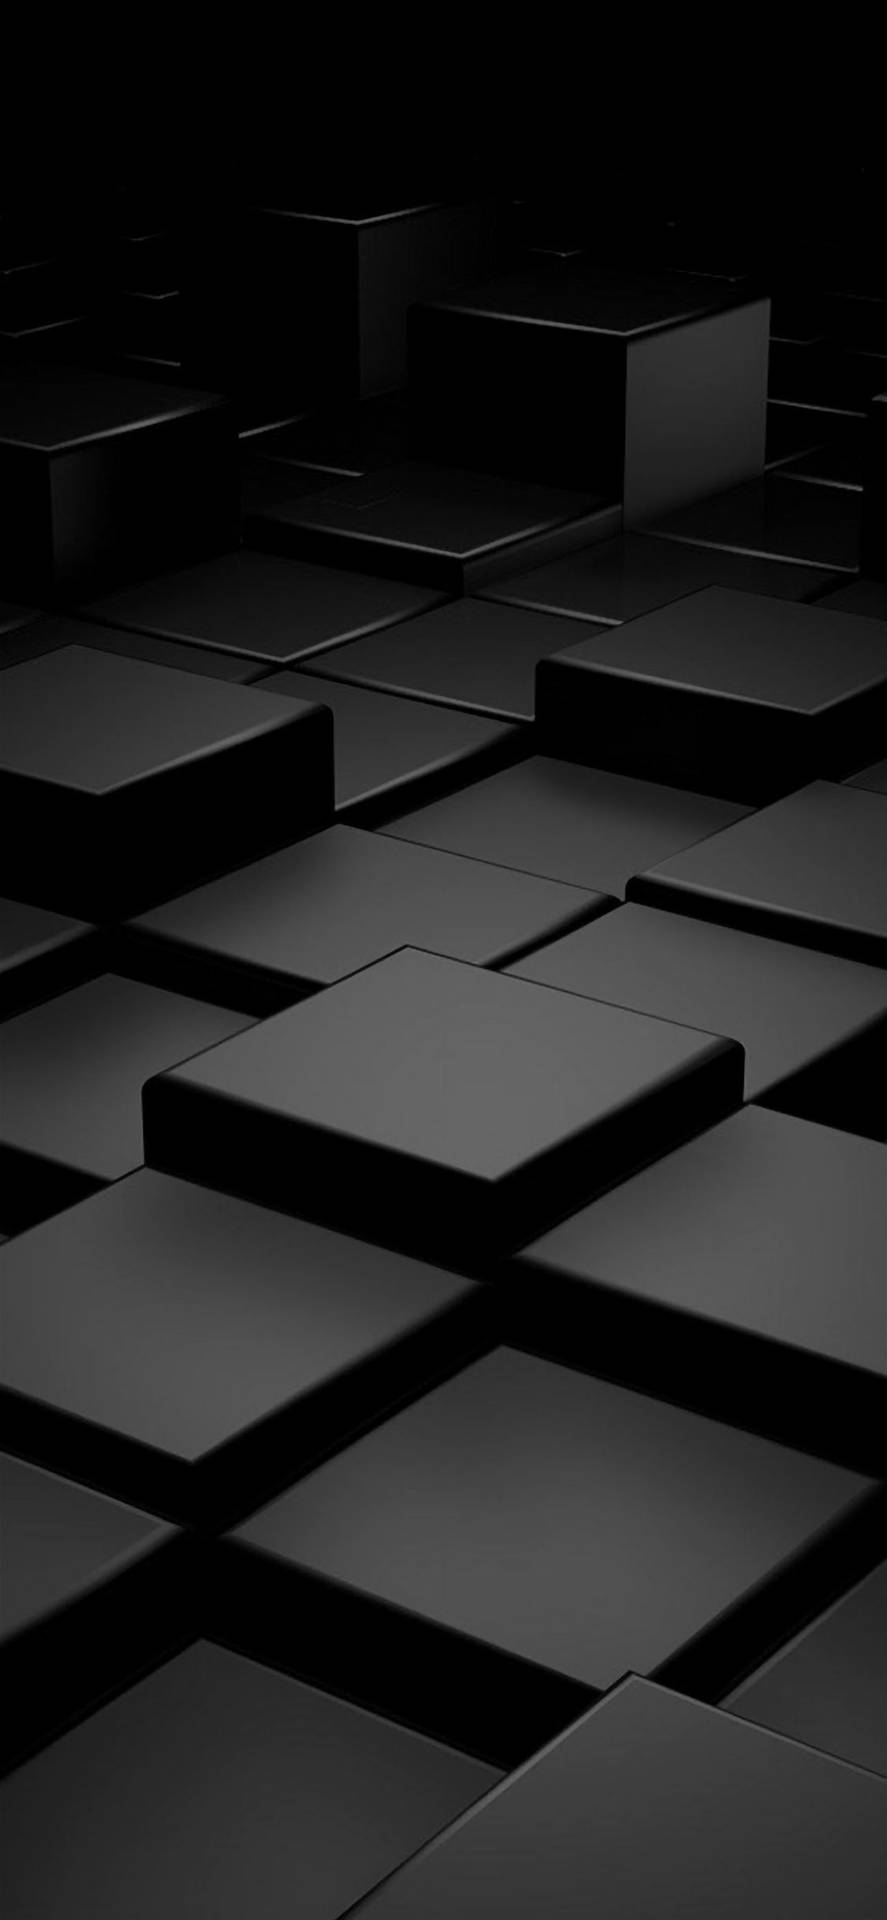 Black Apple Iphone Background Of Cubes Background